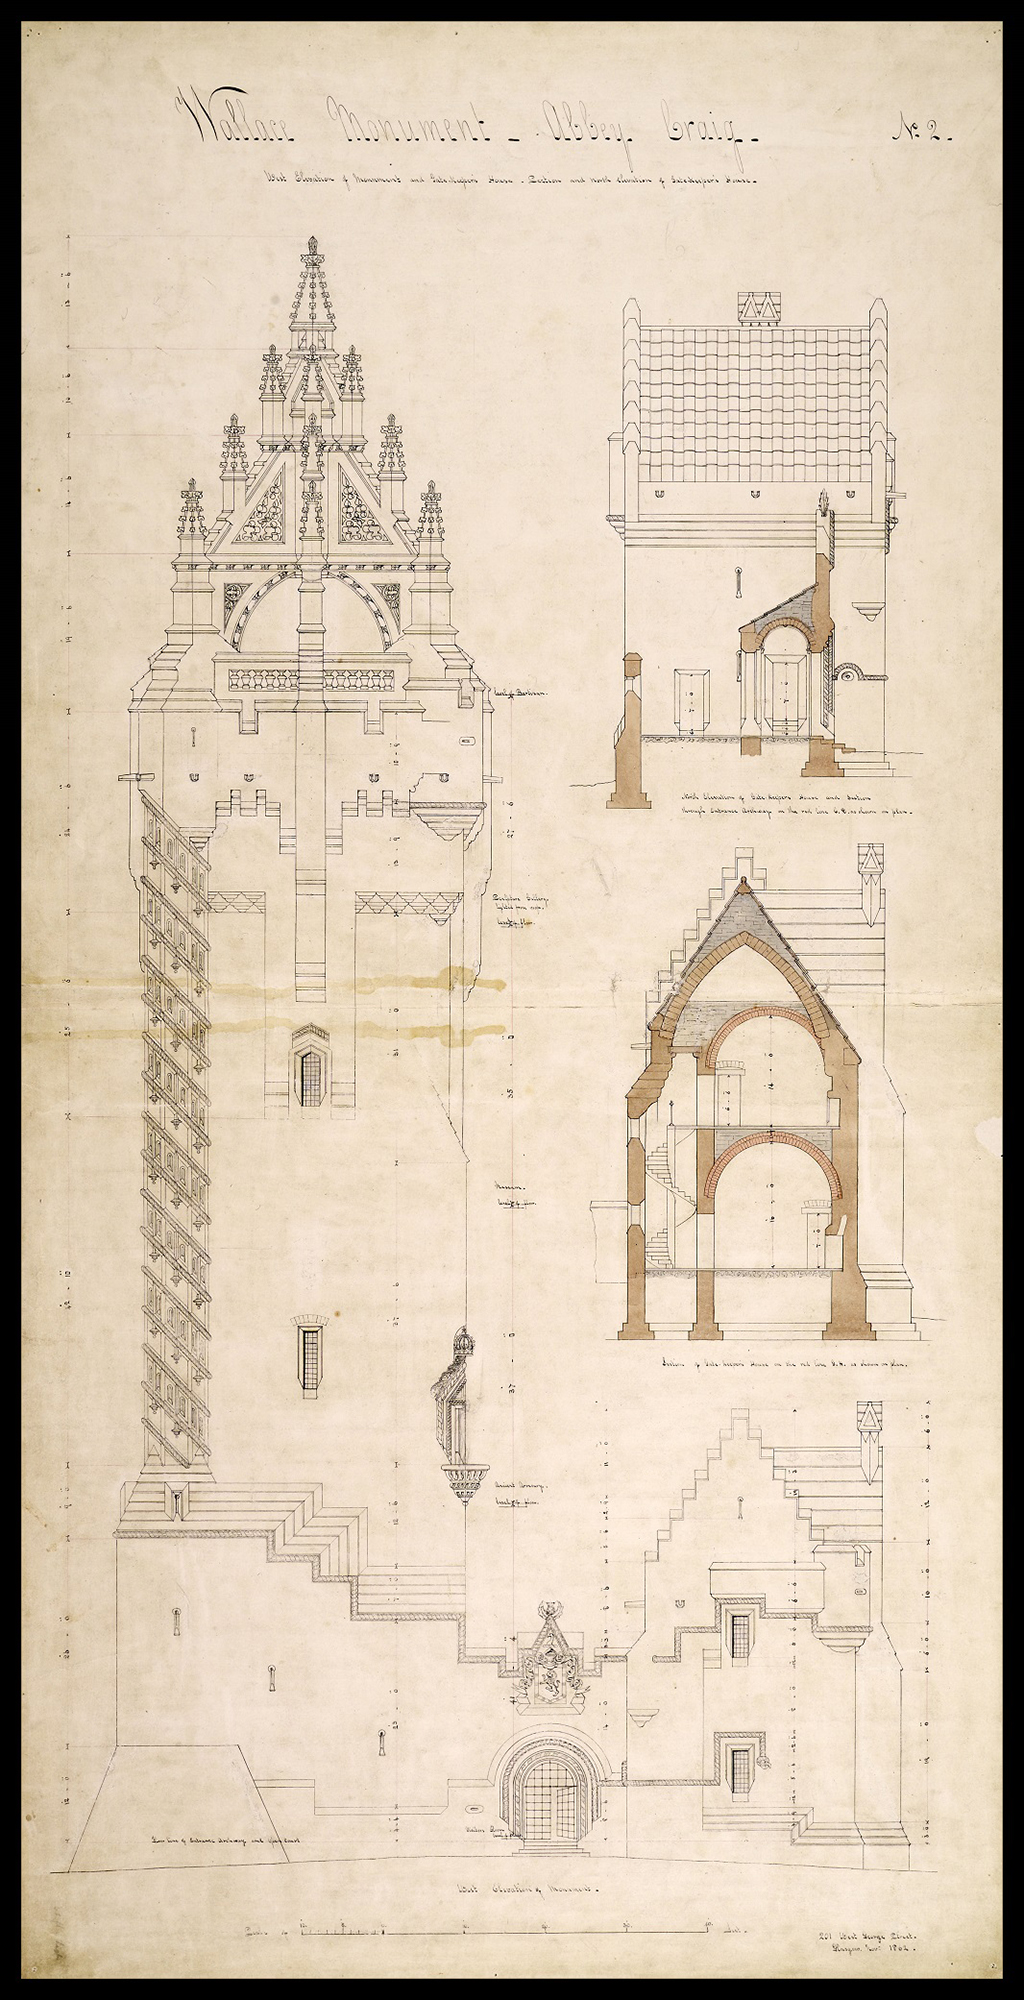 The Wallace Monument plans